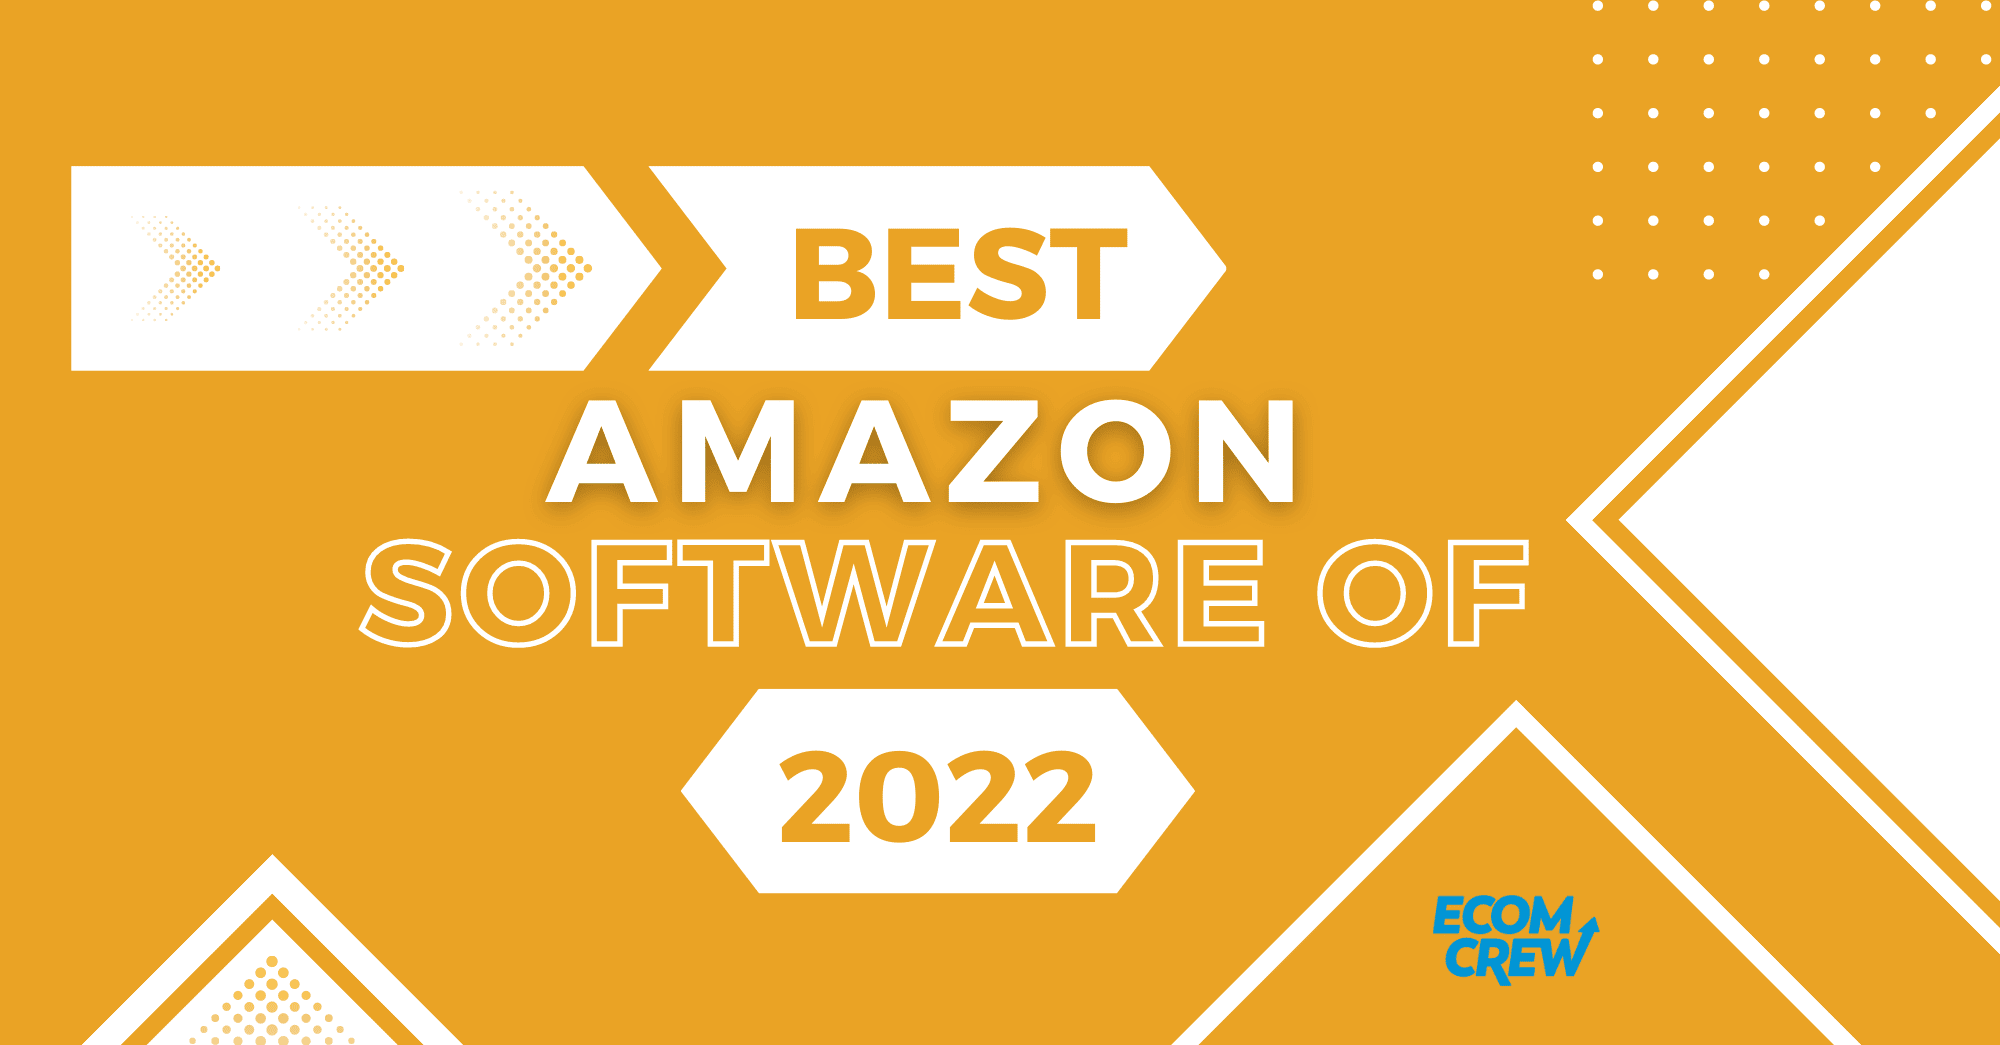 Best Amazon Software of 2022 (2000 × 1045 px)